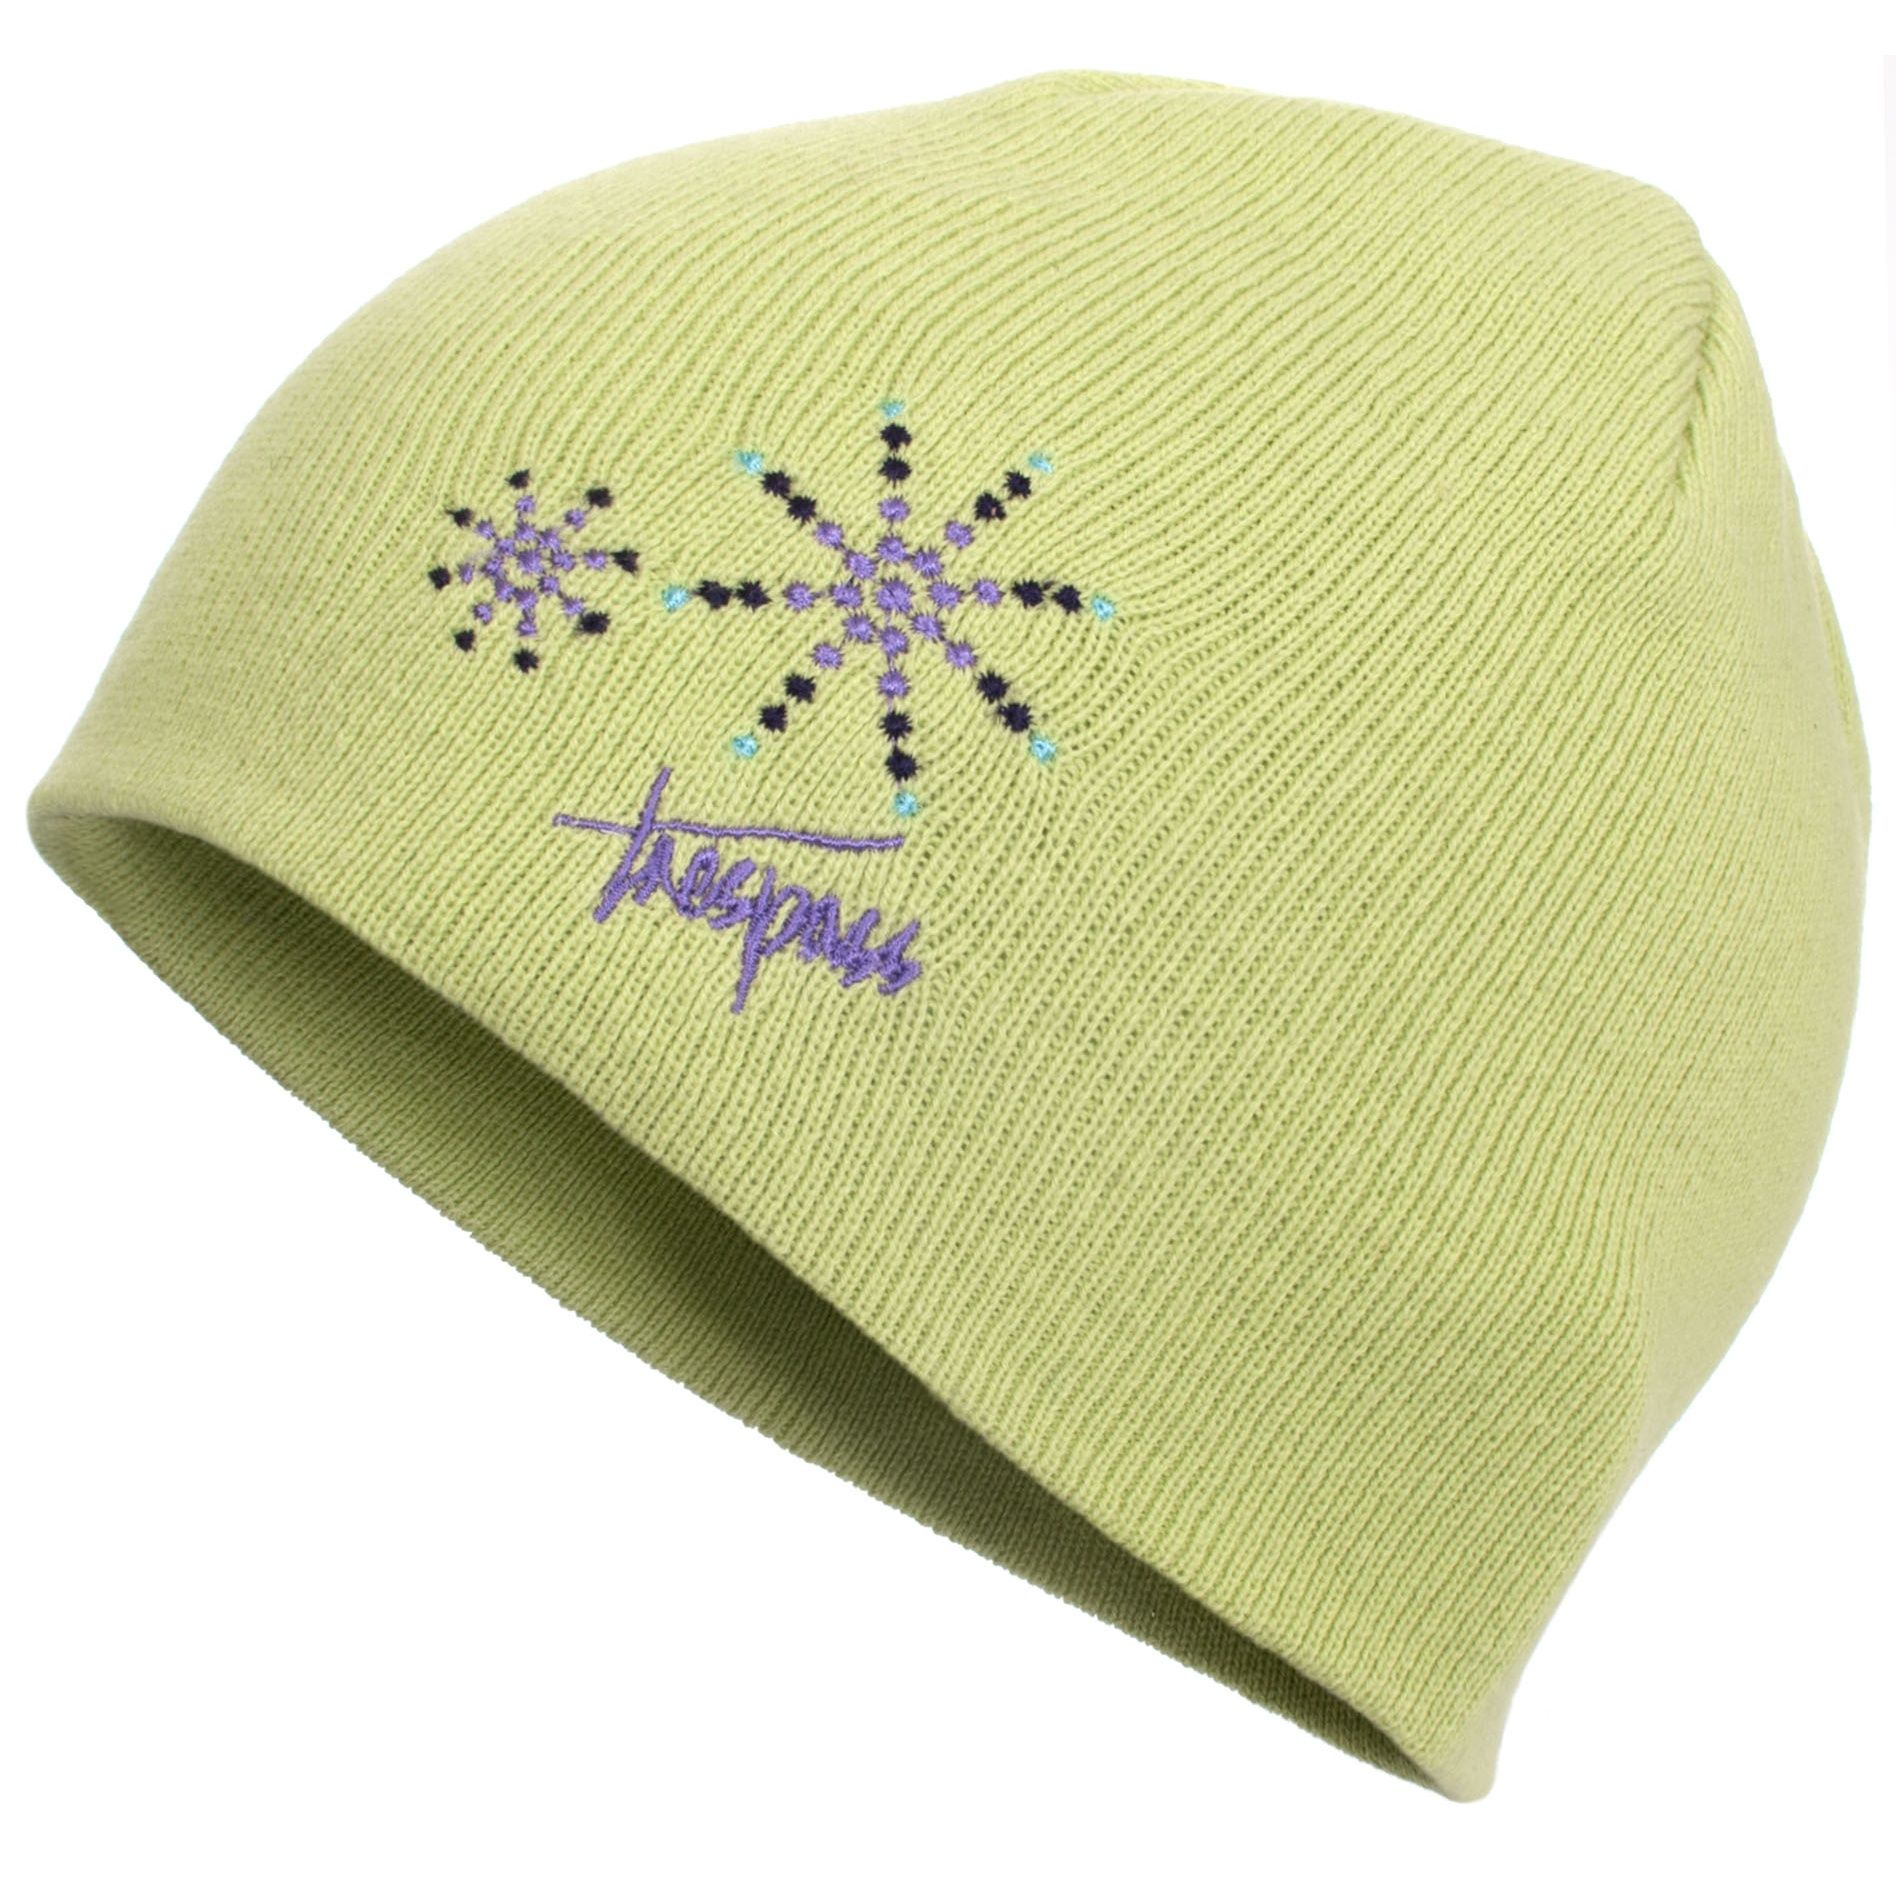 Girls knitted beanie hat. Embroidered detail. Shell: 100% acrylic. Lining: double walled.